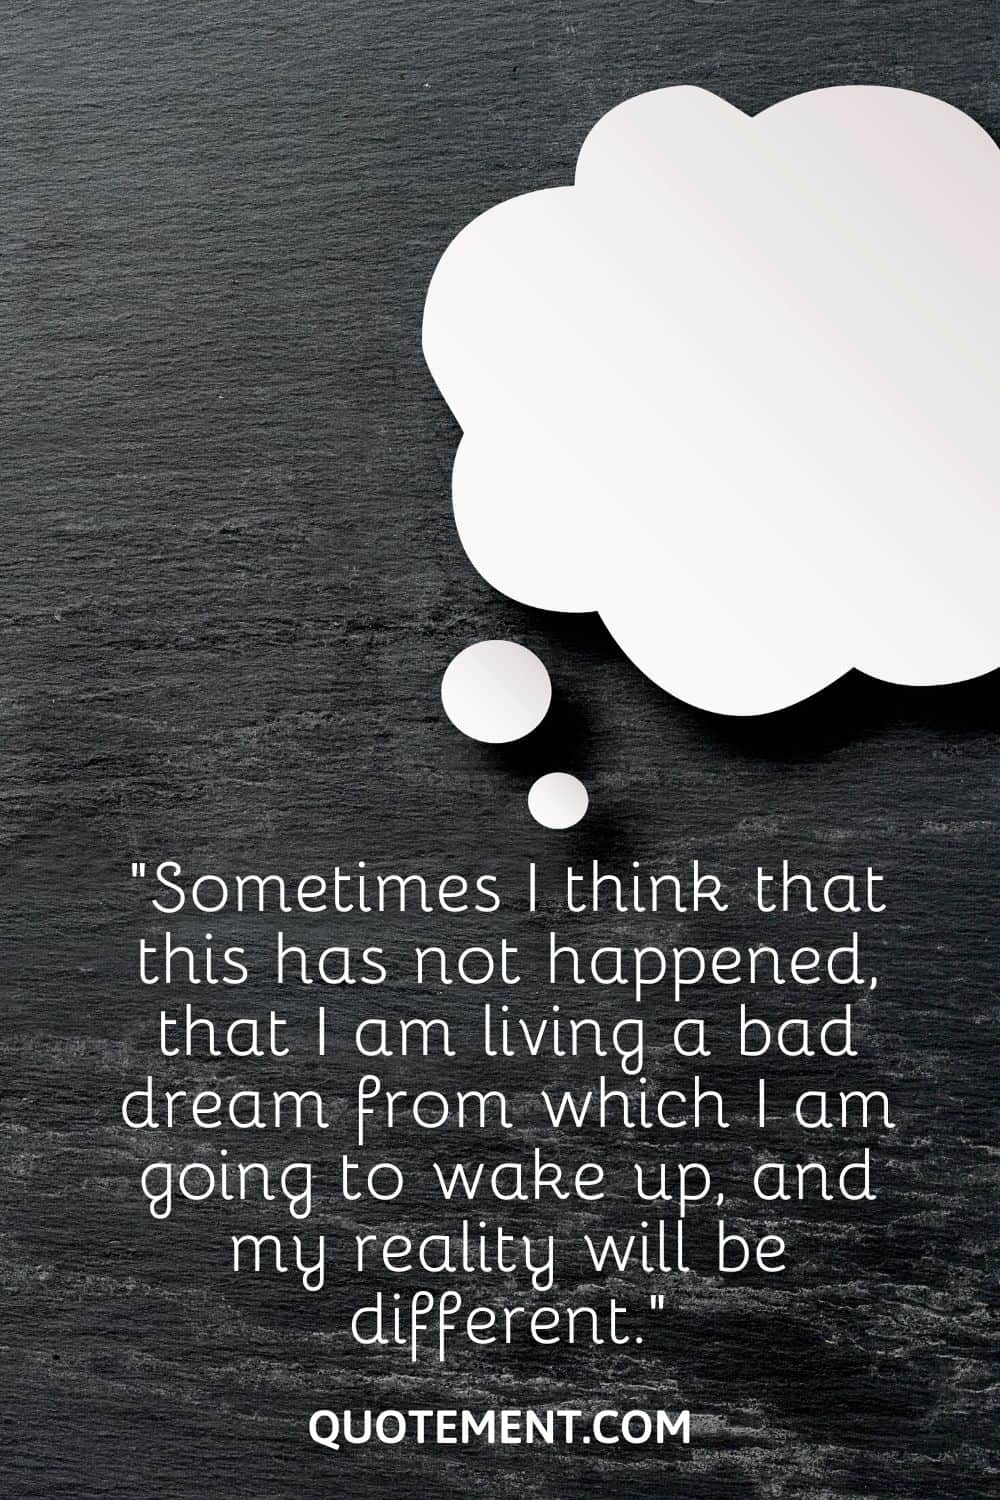 “Sometimes I think that this has not happened, that I am living a bad dream from which I am going to wake up, and my reality will be different.”